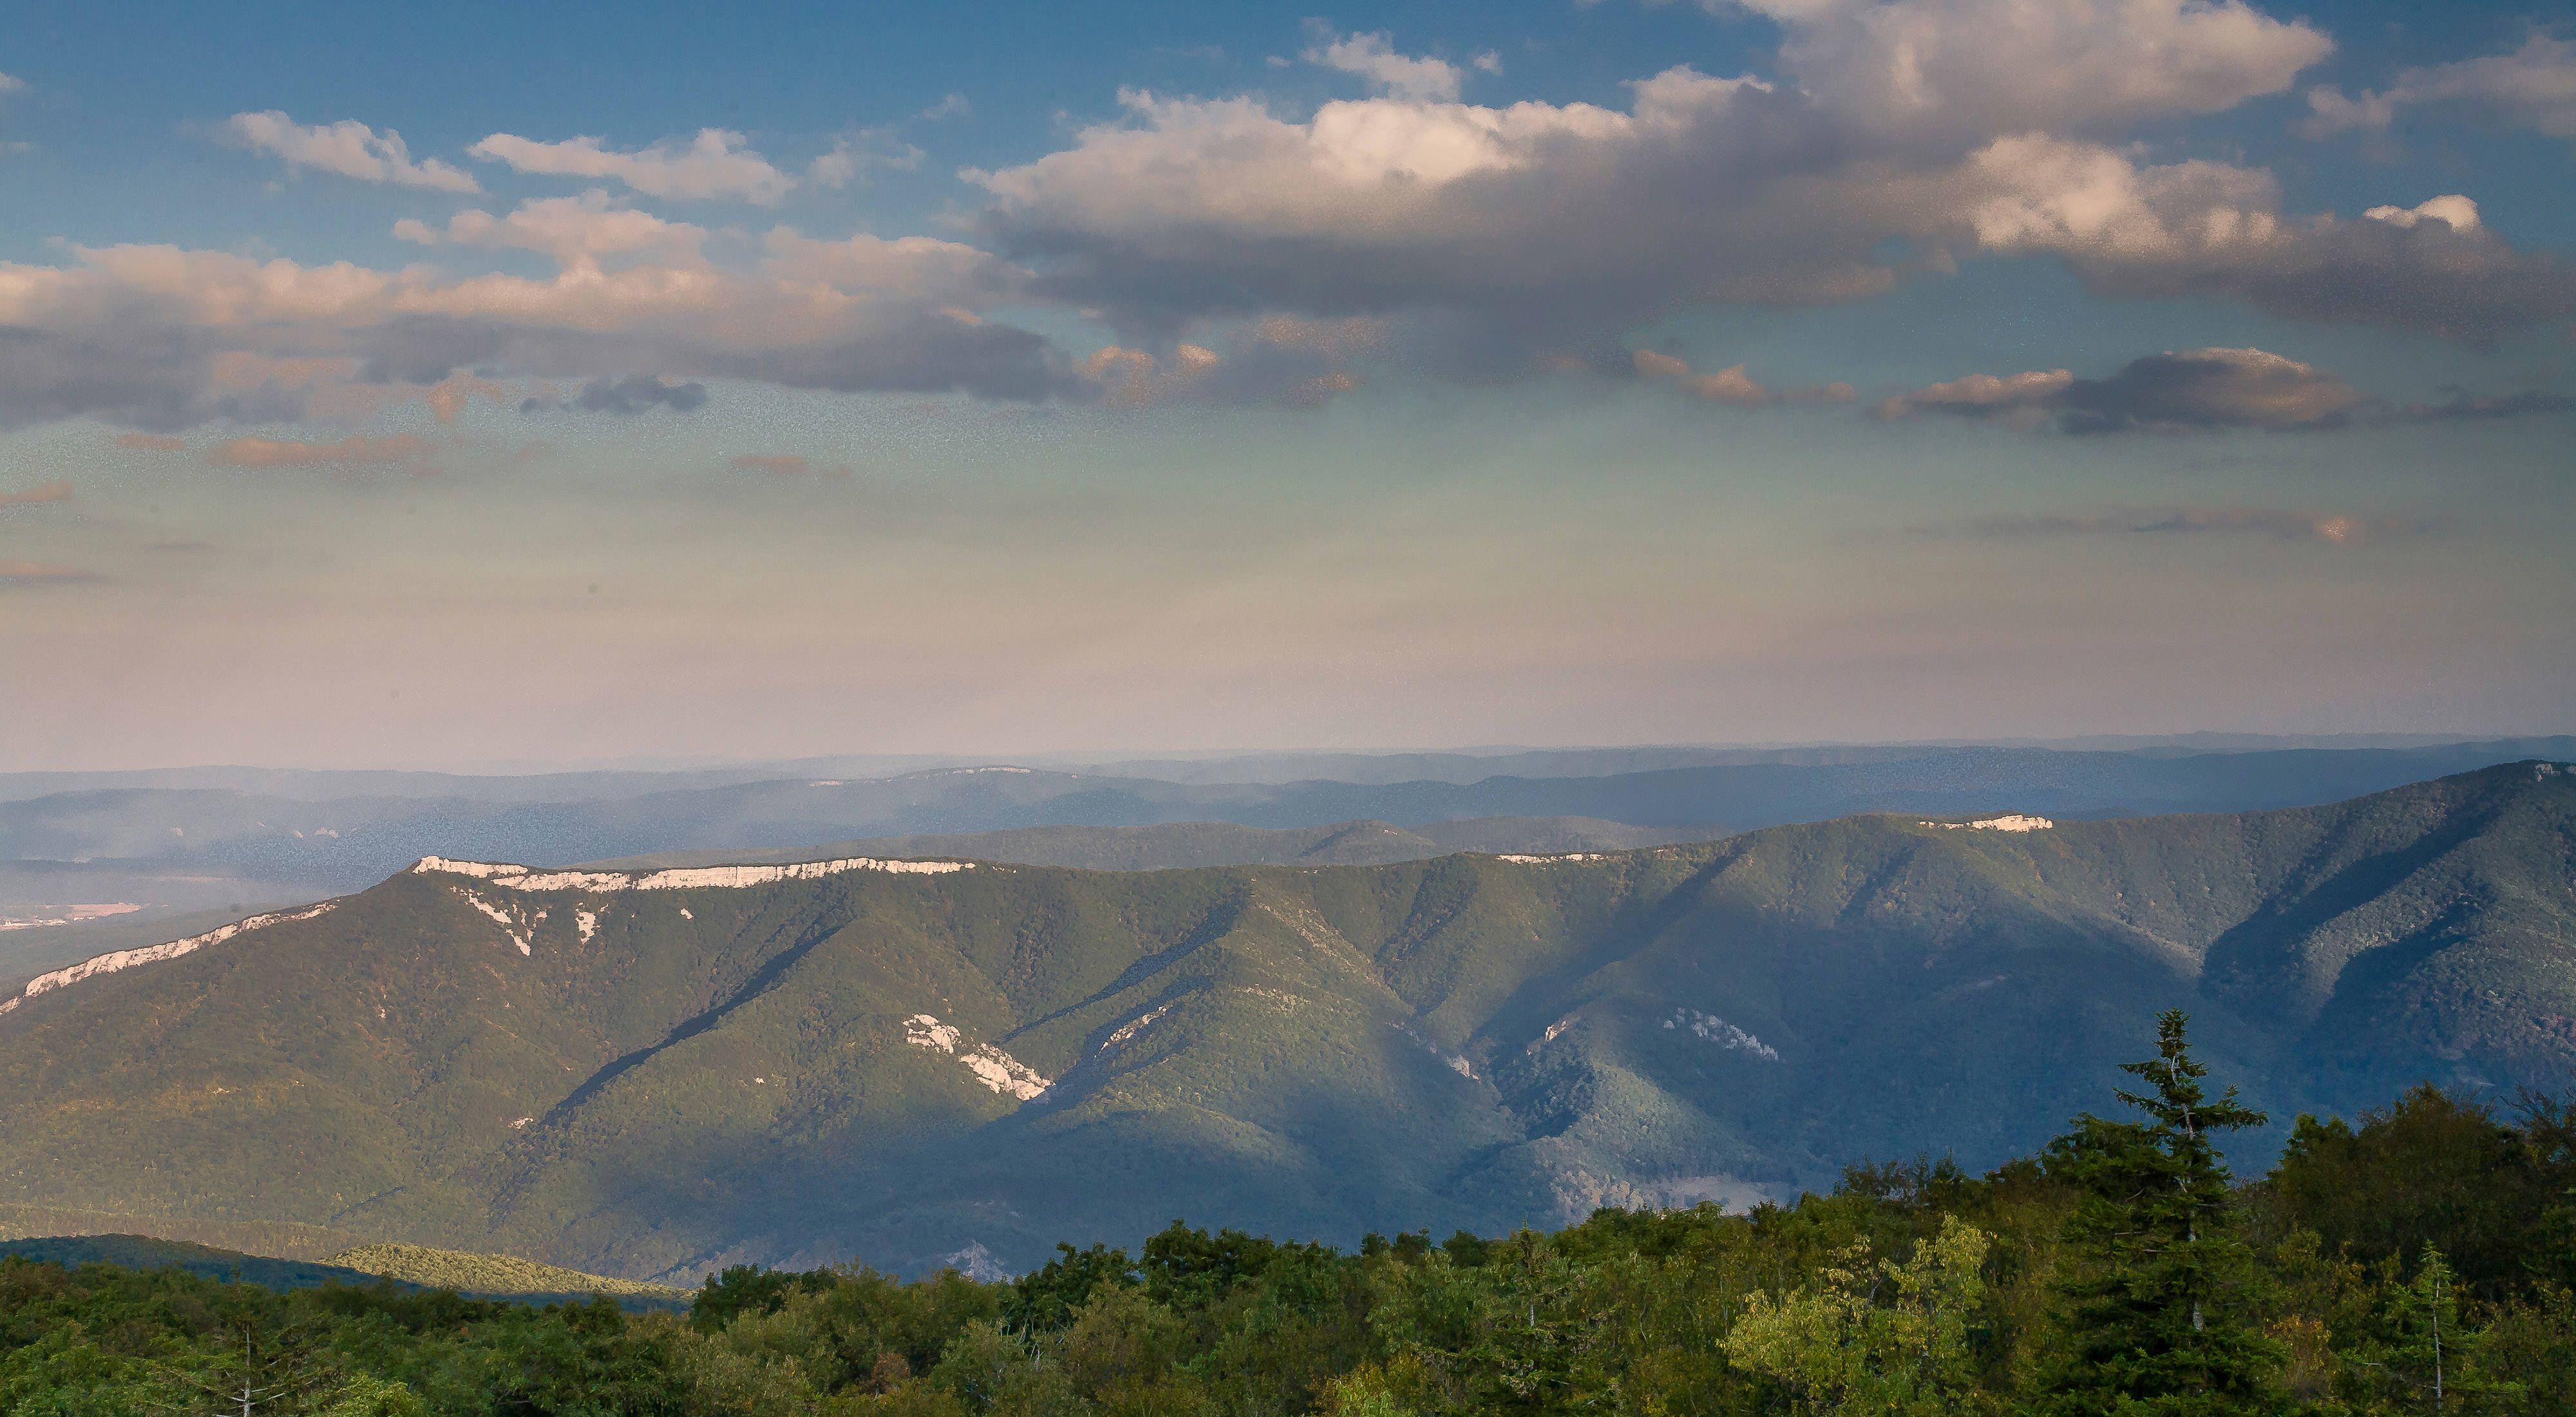 This peak is the driest high mountain in the Appalachians.